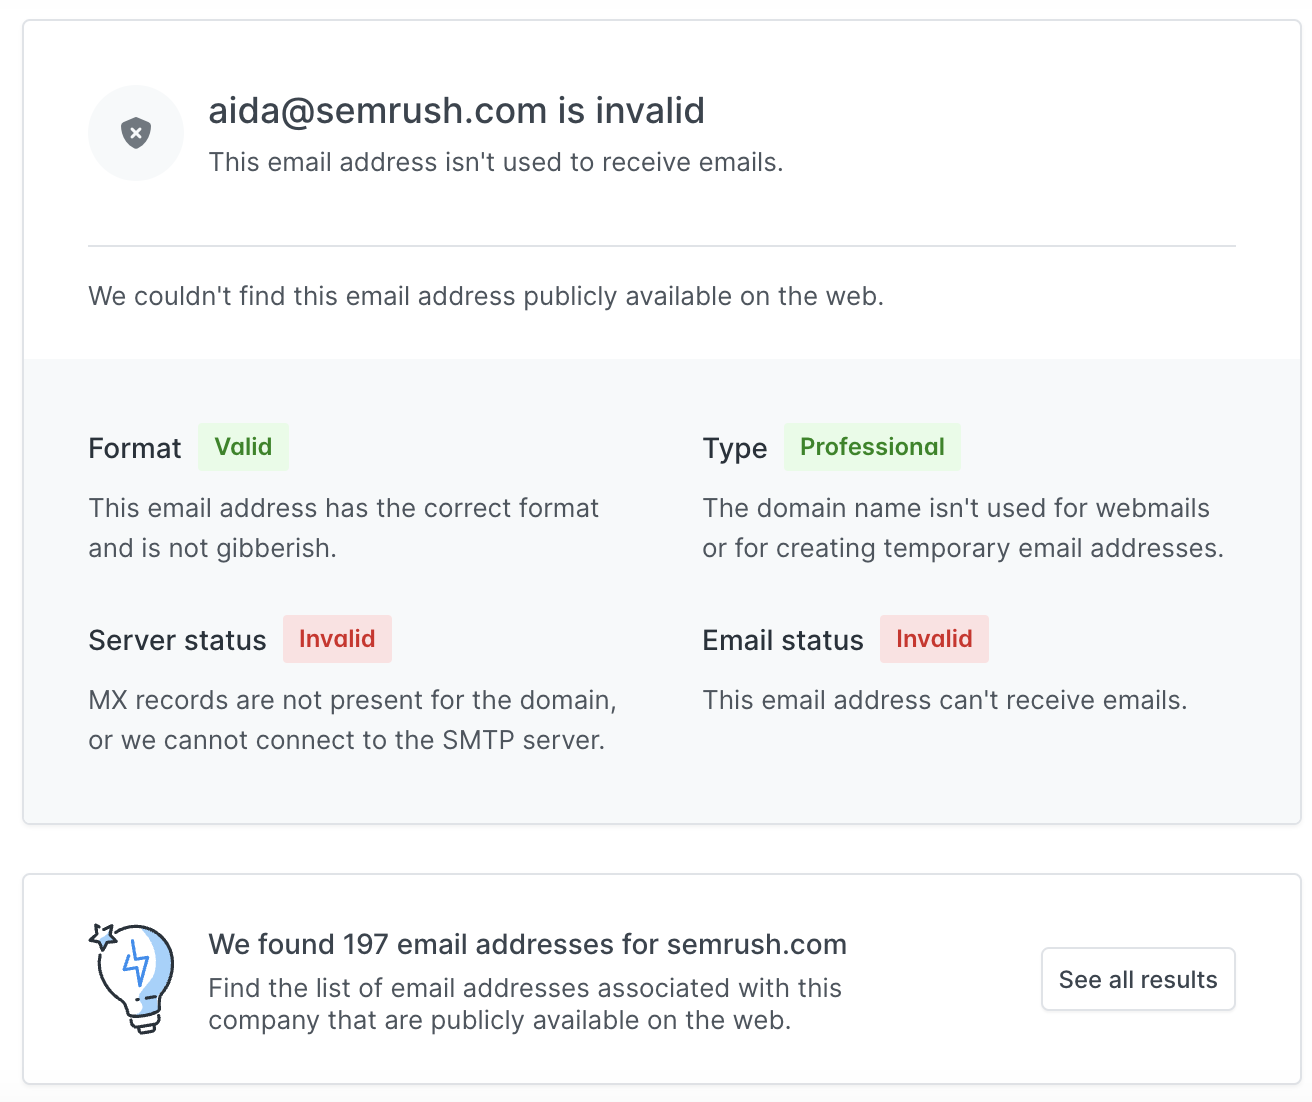 Hunter's results for an invalid email address "aida@semrush.com"